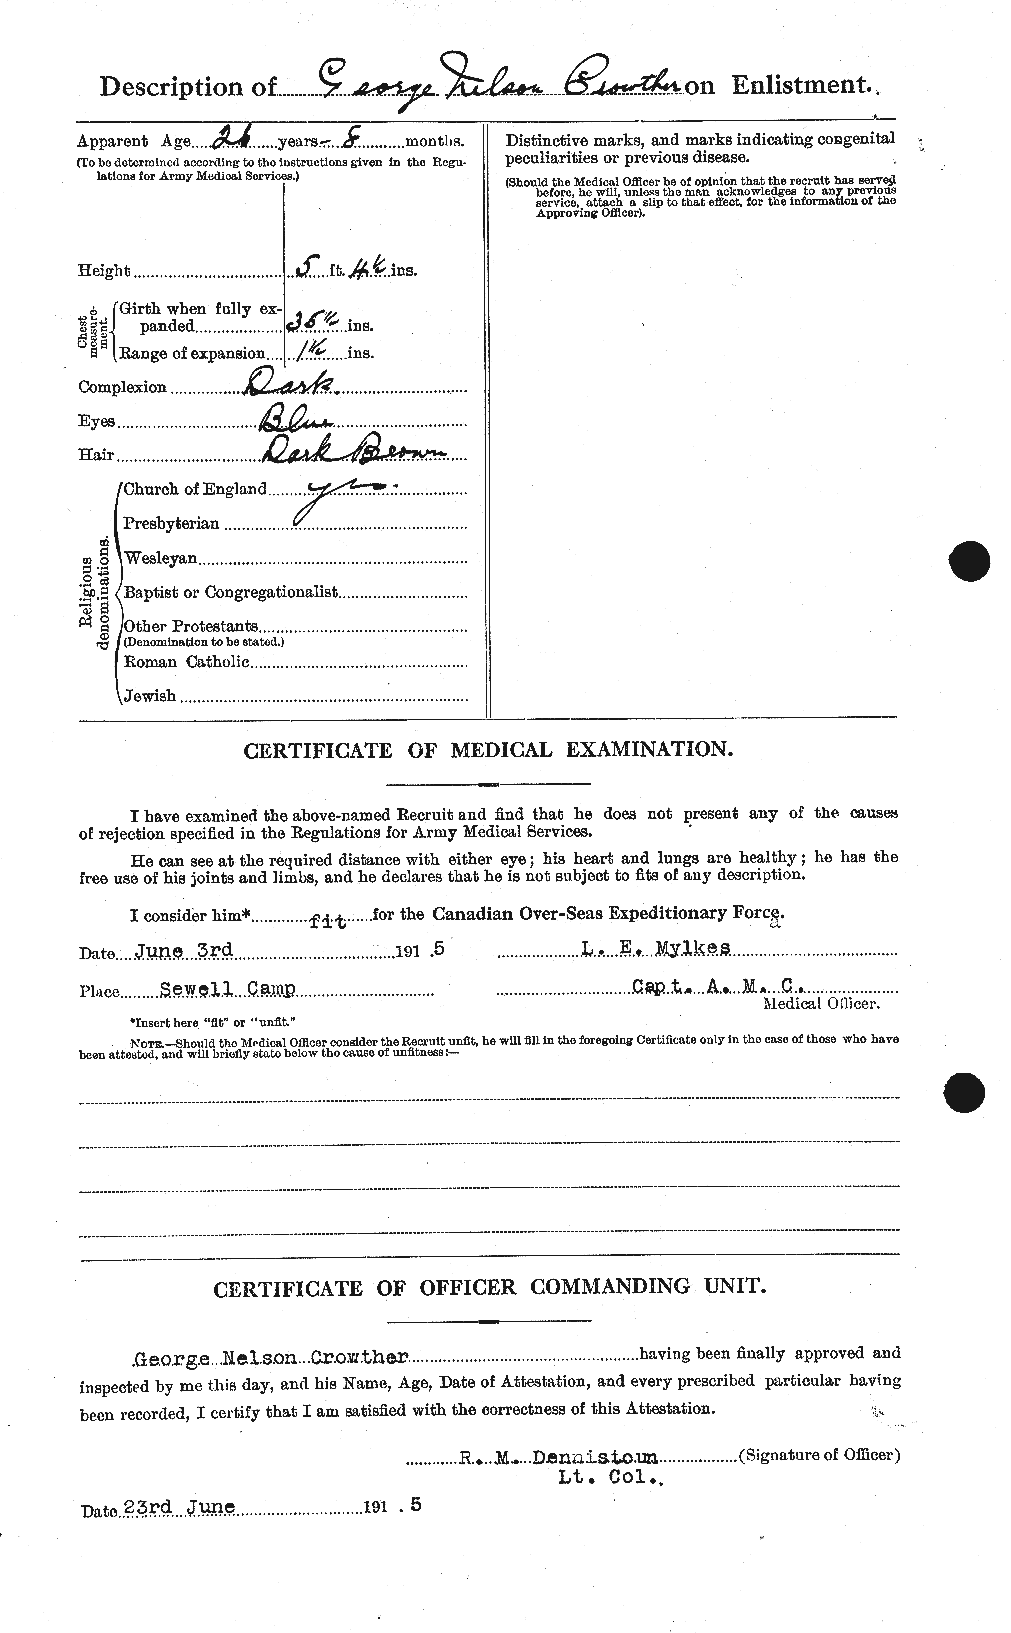 Personnel Records of the First World War - CEF 066859b